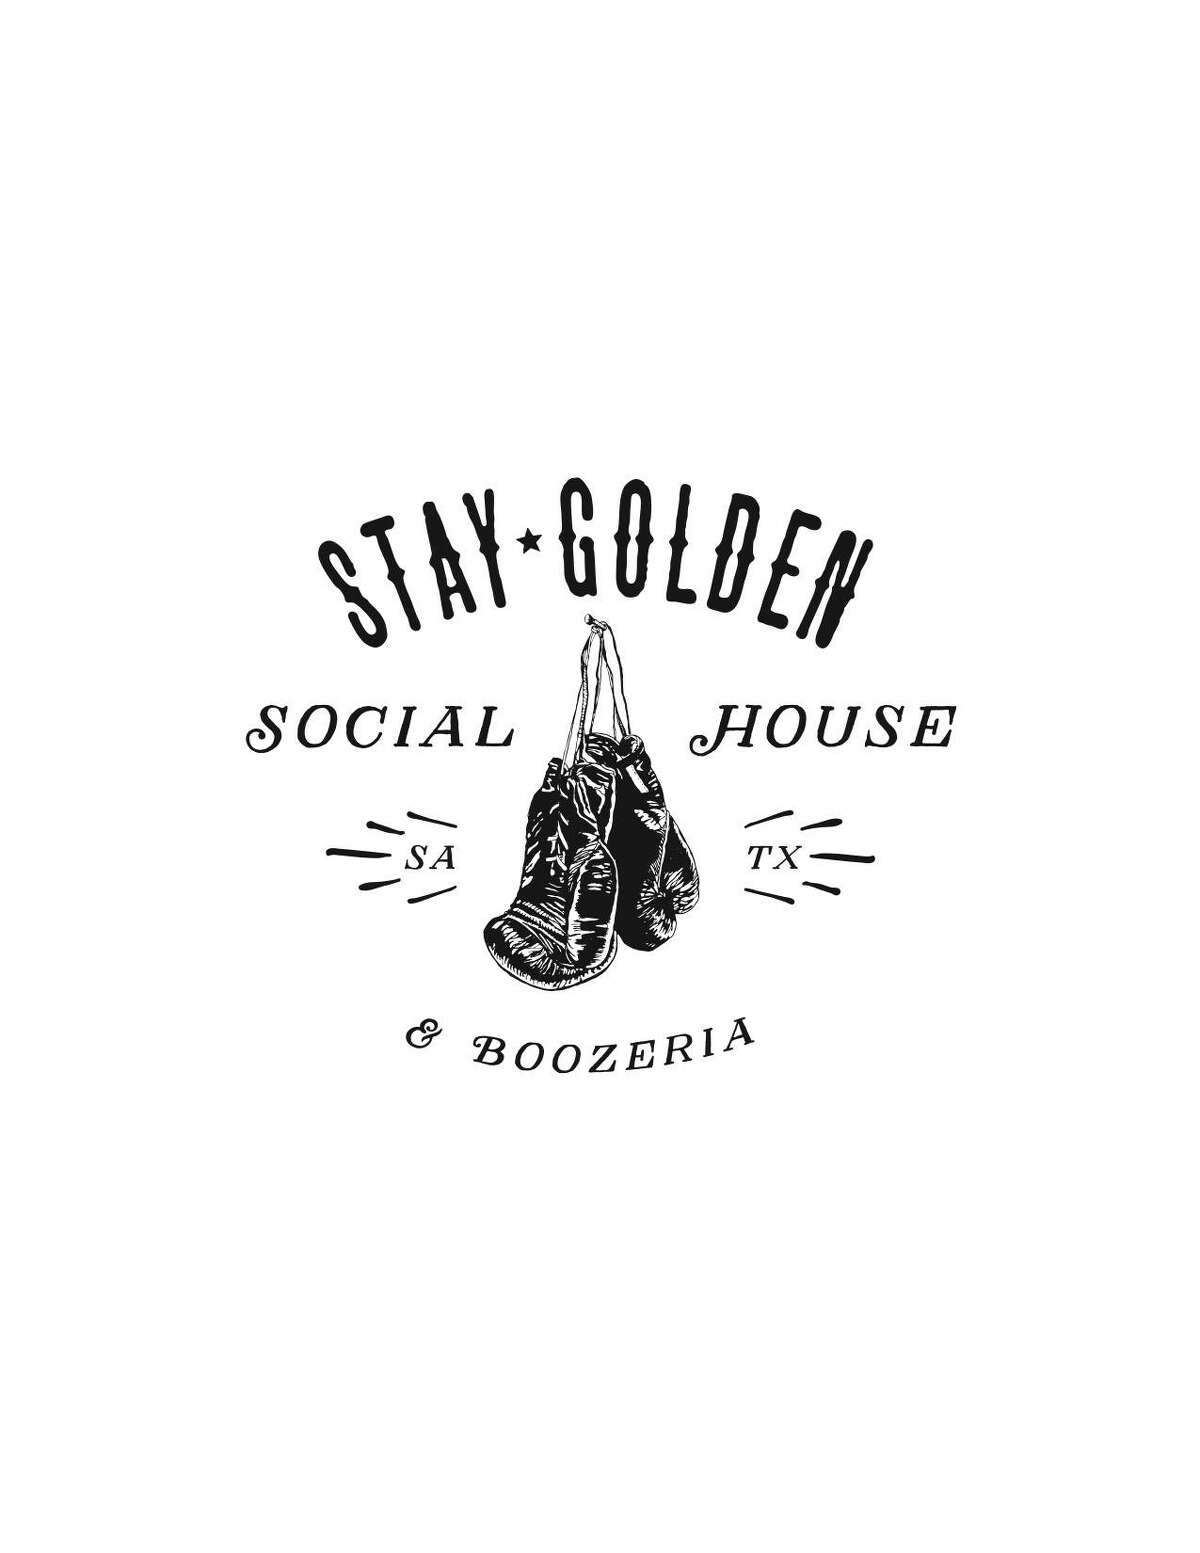 Need to keep your spirits golden after Stay Golden's closure? Keep clicking to view some rad bars around the Alamo City.